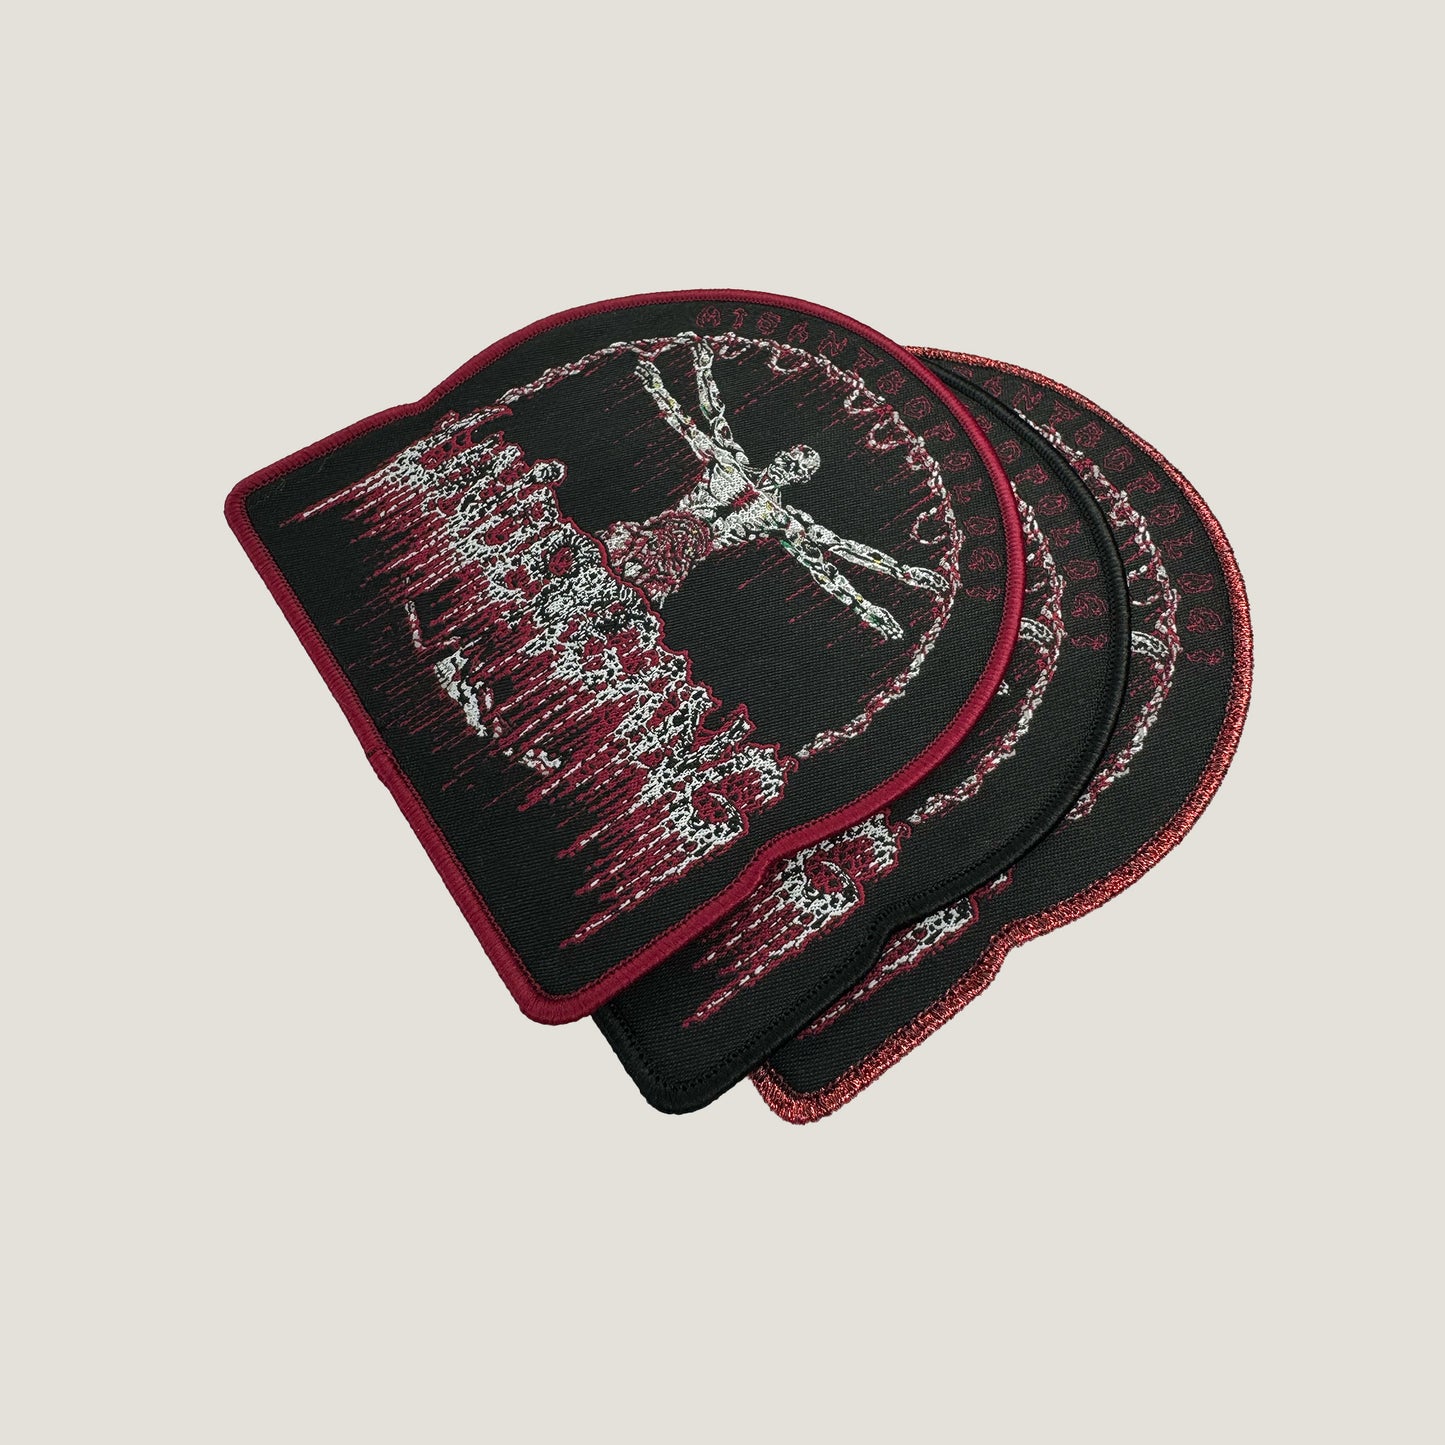 Temporal Dimensions Patches Undergang Misantropologi Metal Woven Patches